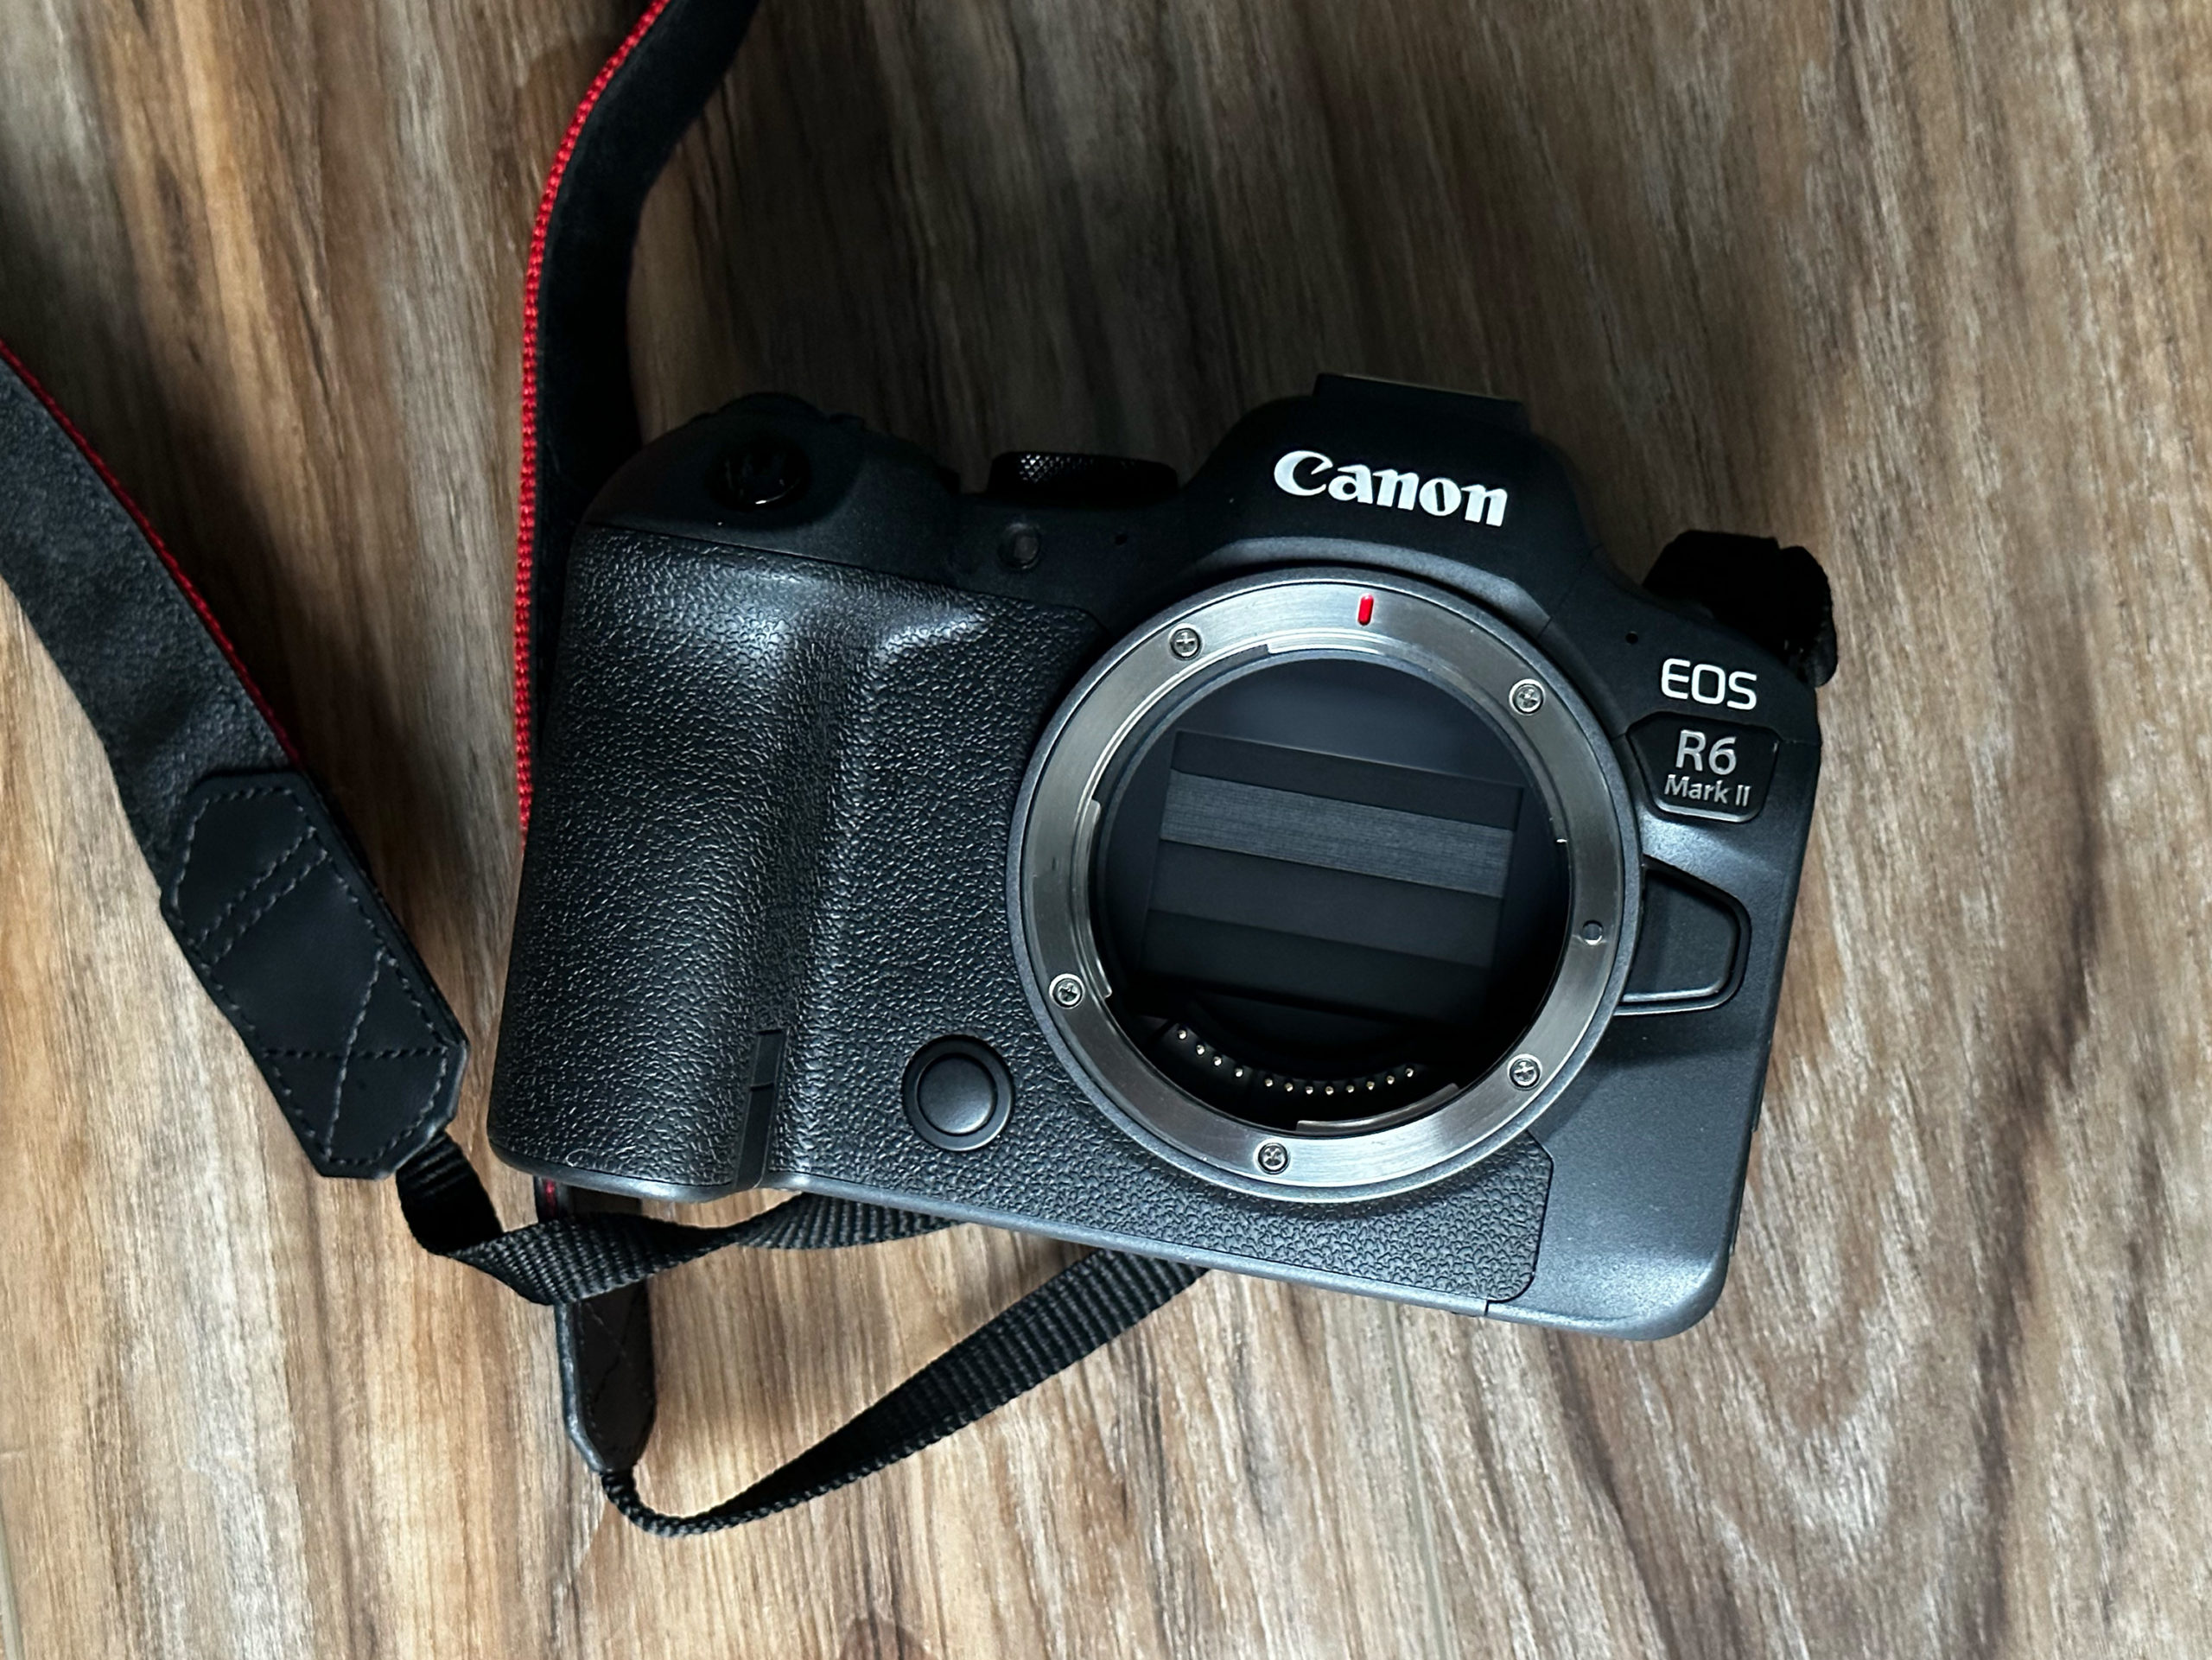 Best Flash for Canon R6 (and Mark ii)